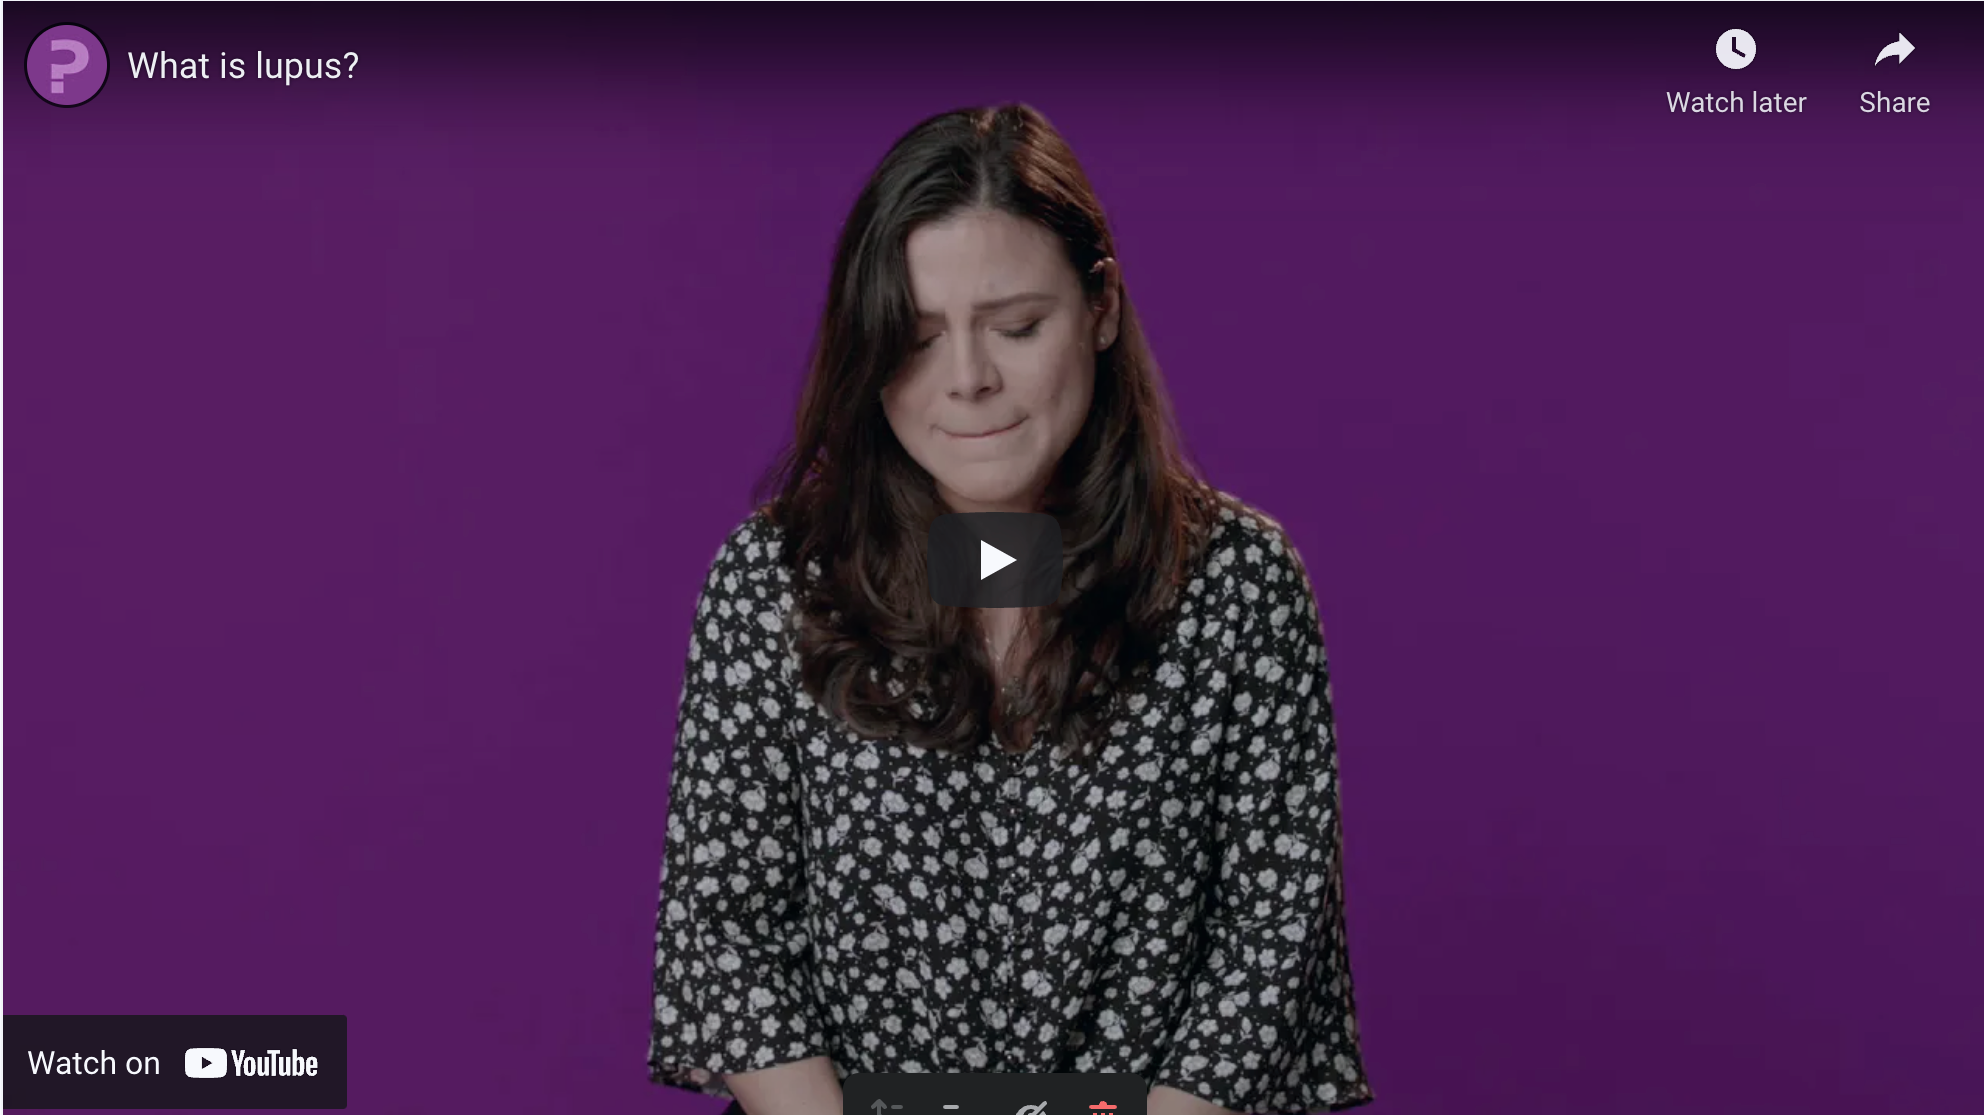 Load video: video explainer of what lupus is